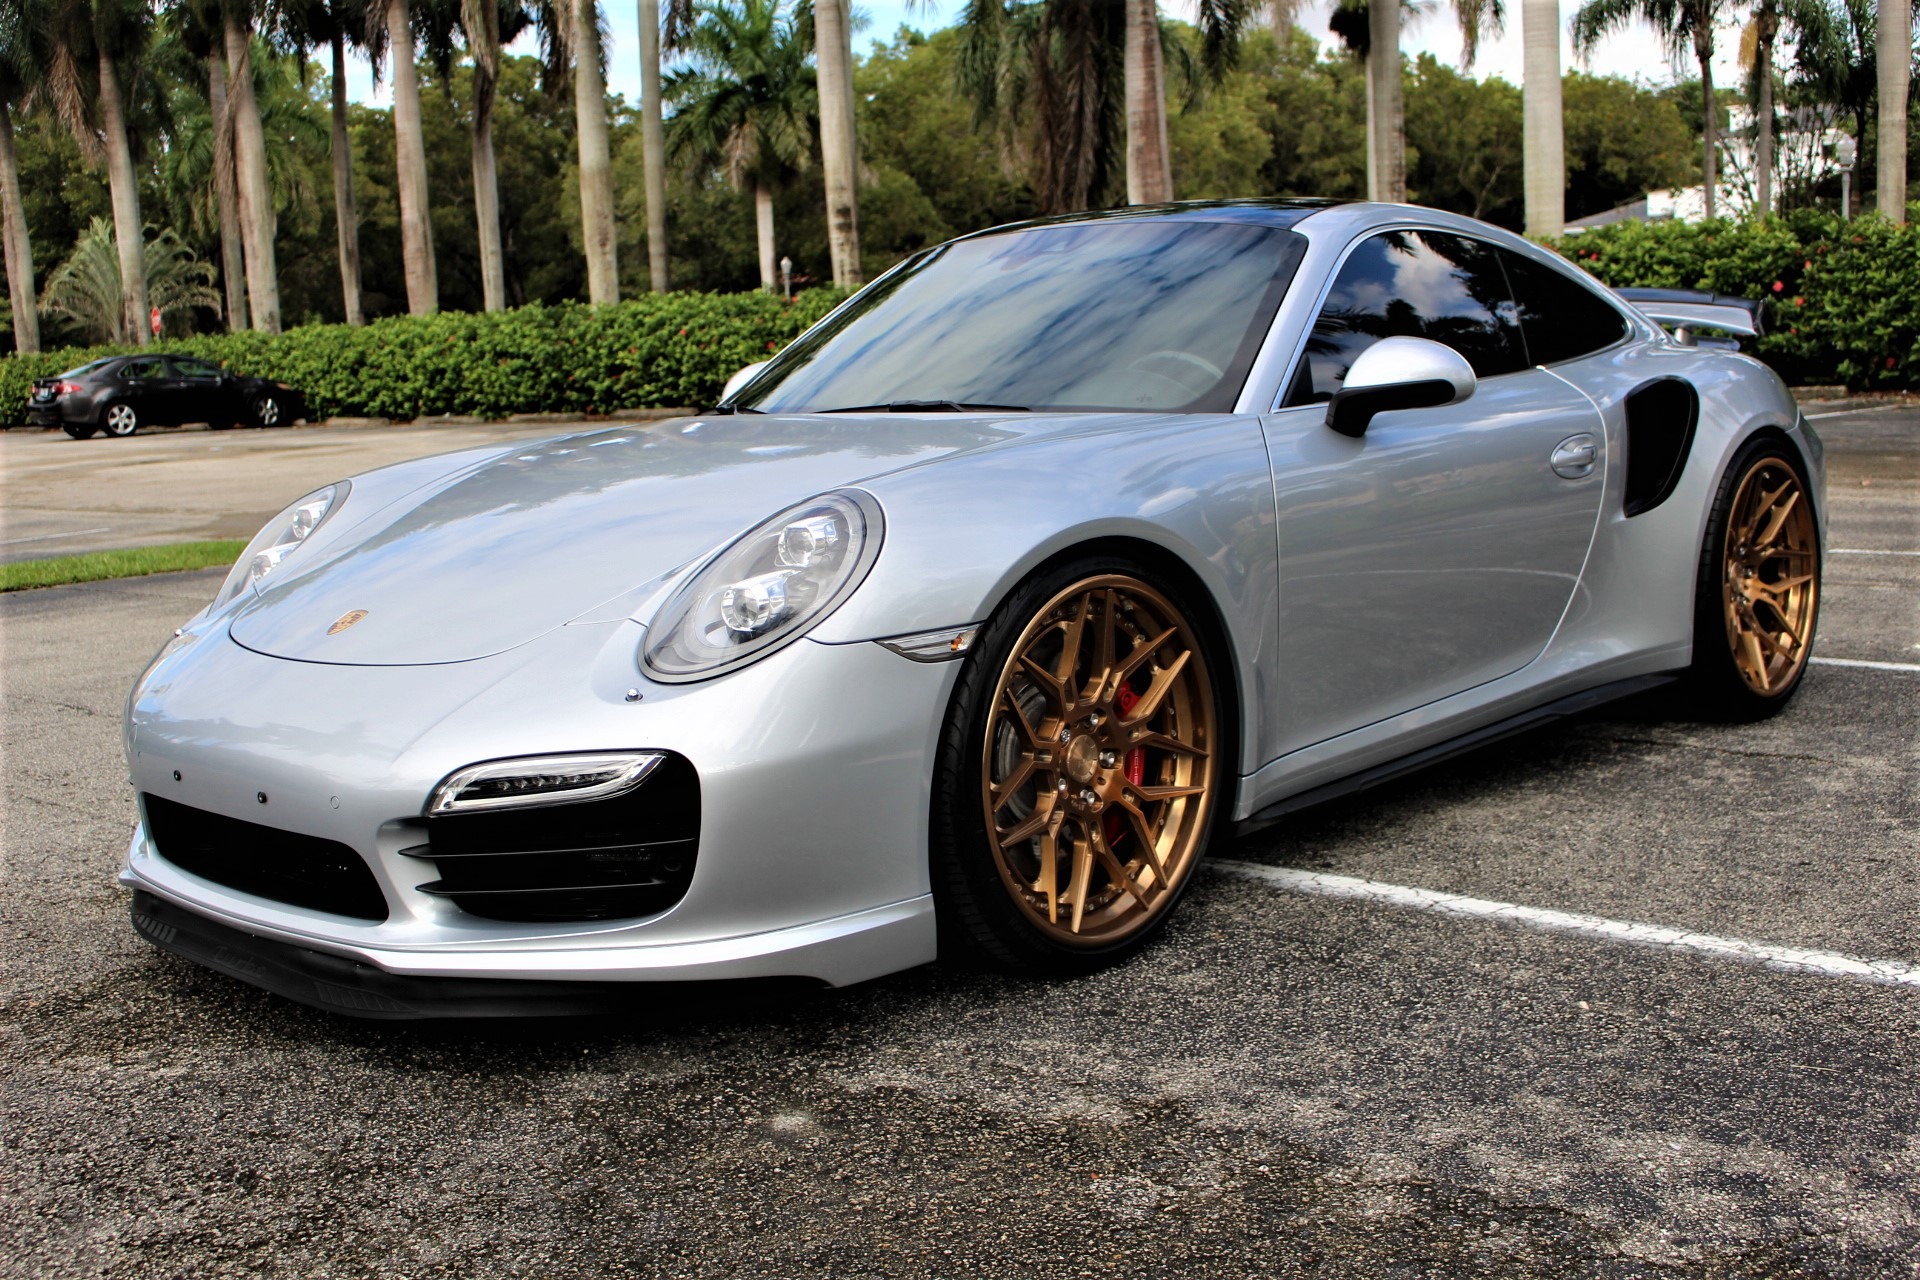 Used 2016 Porsche 911 Turbo for sale Sold at The Gables Sports Cars in Miami FL 33146 4